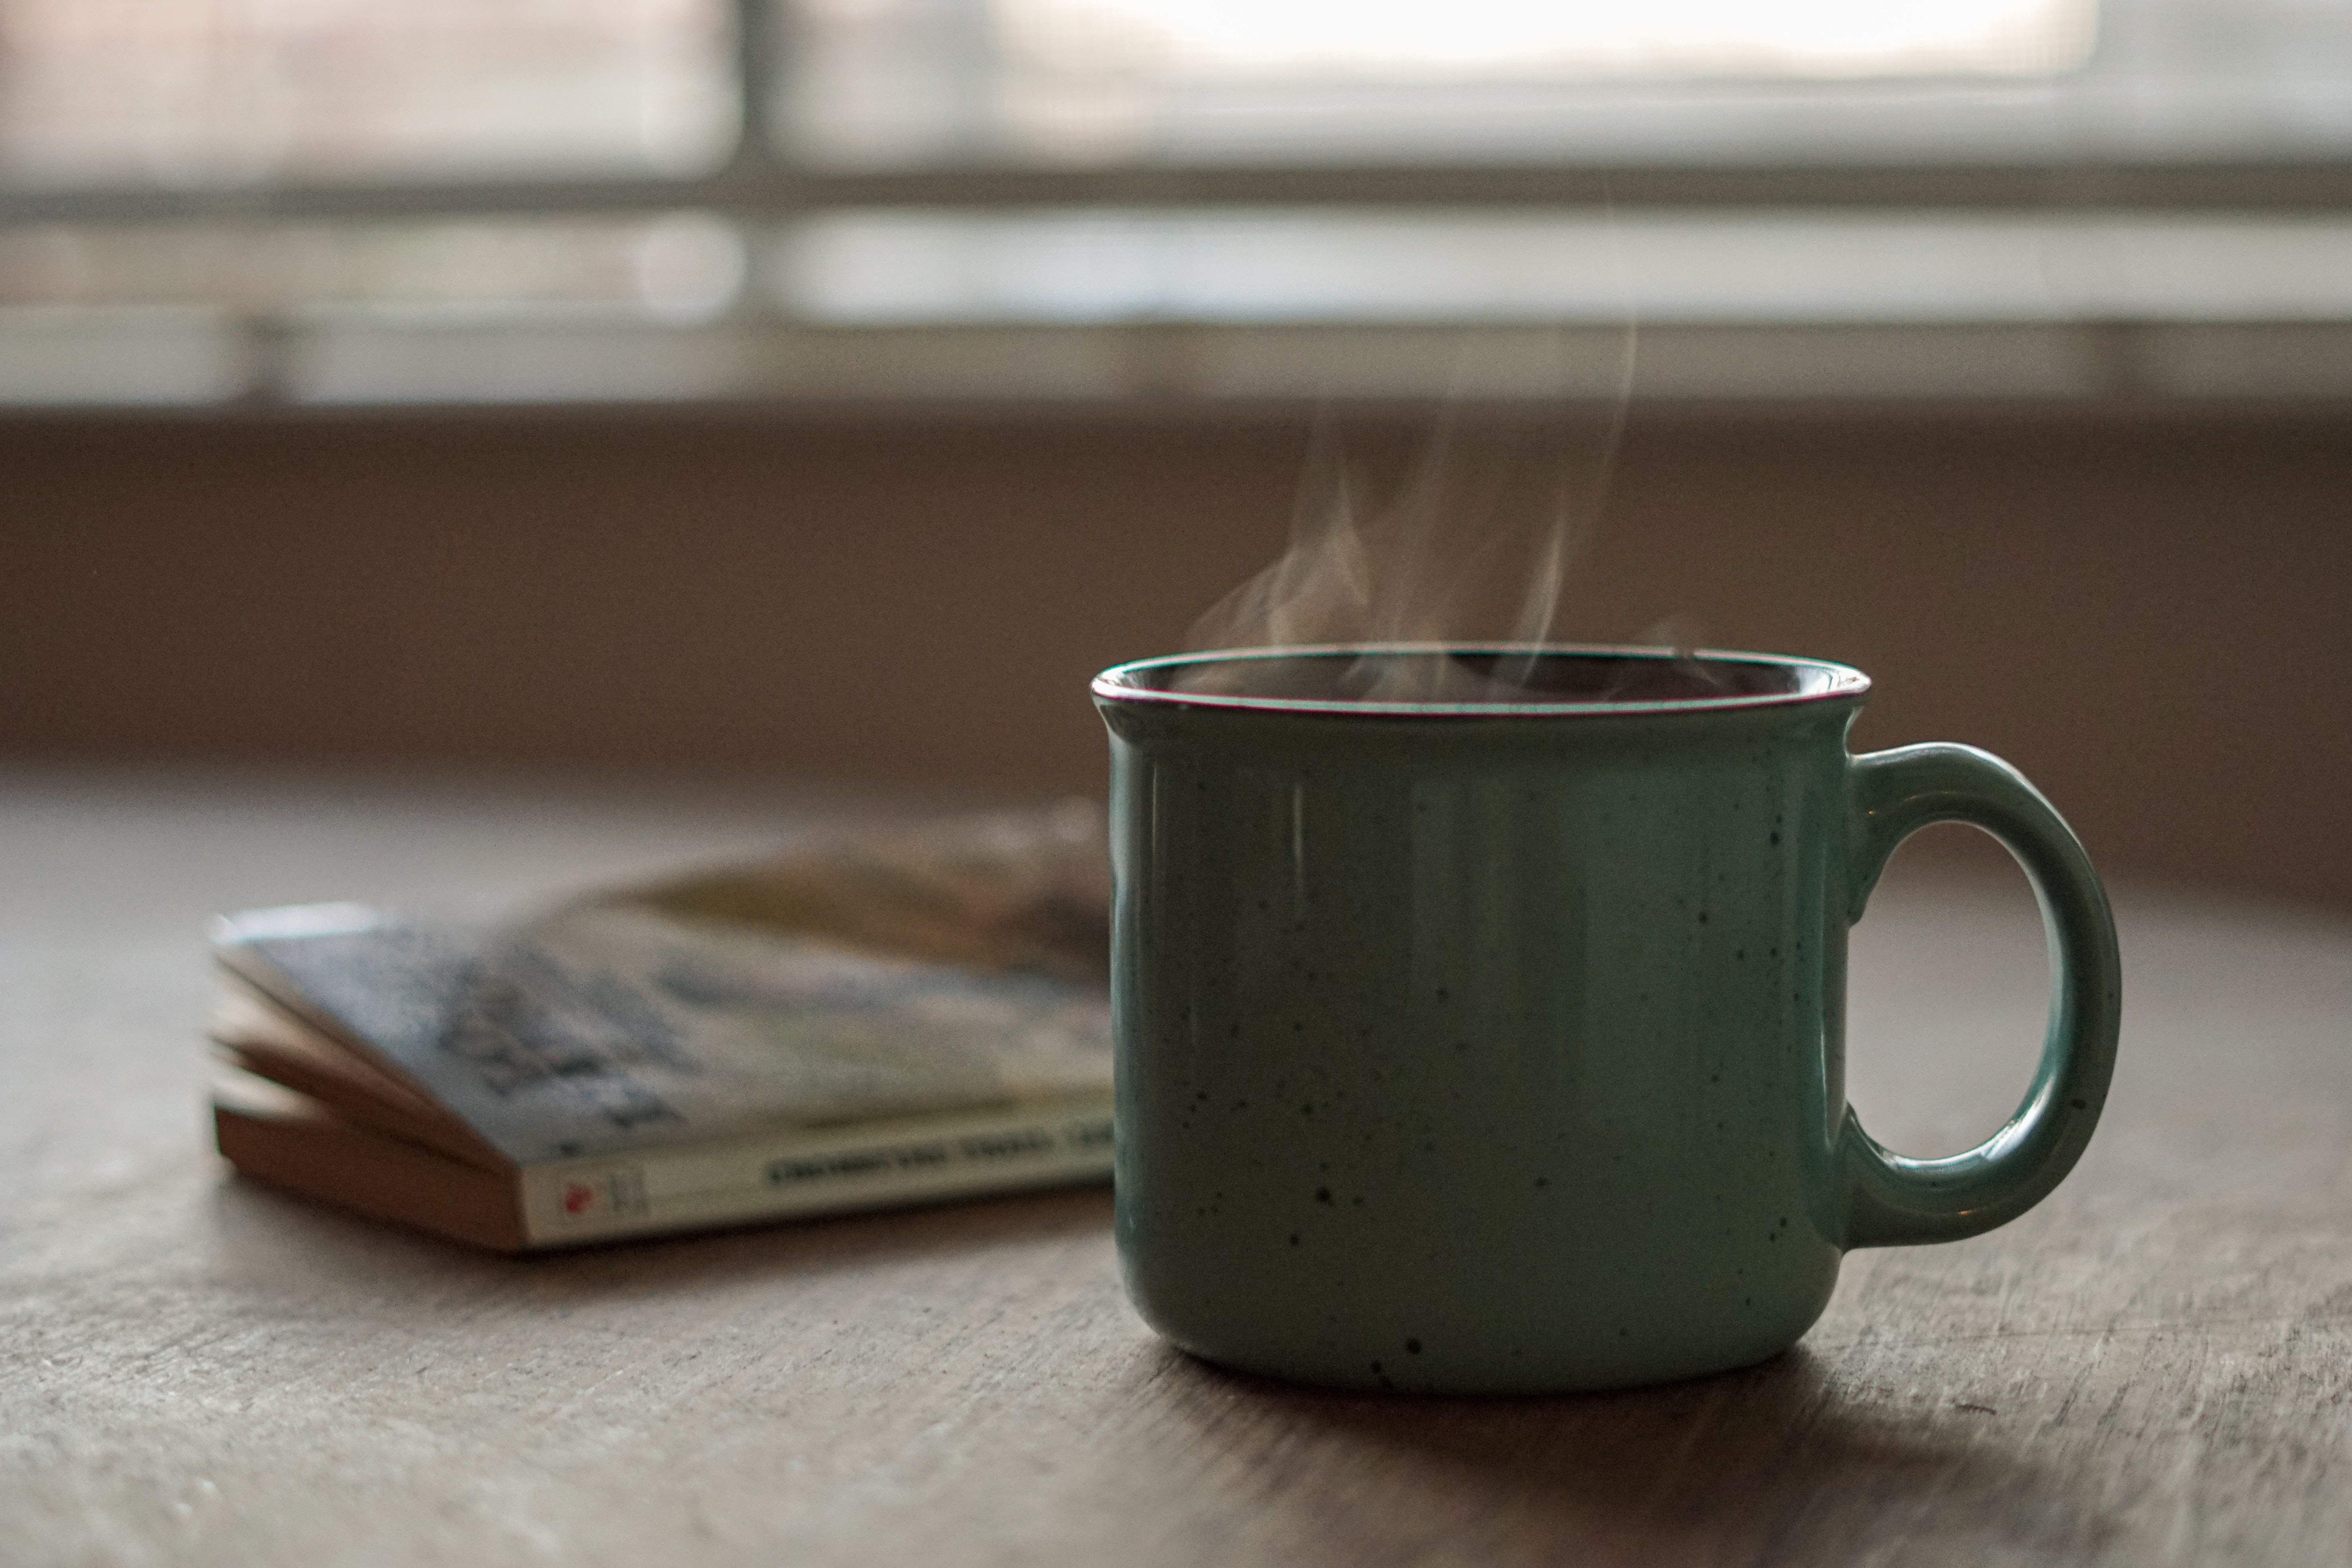 Mug of steaming coffee and book on a table